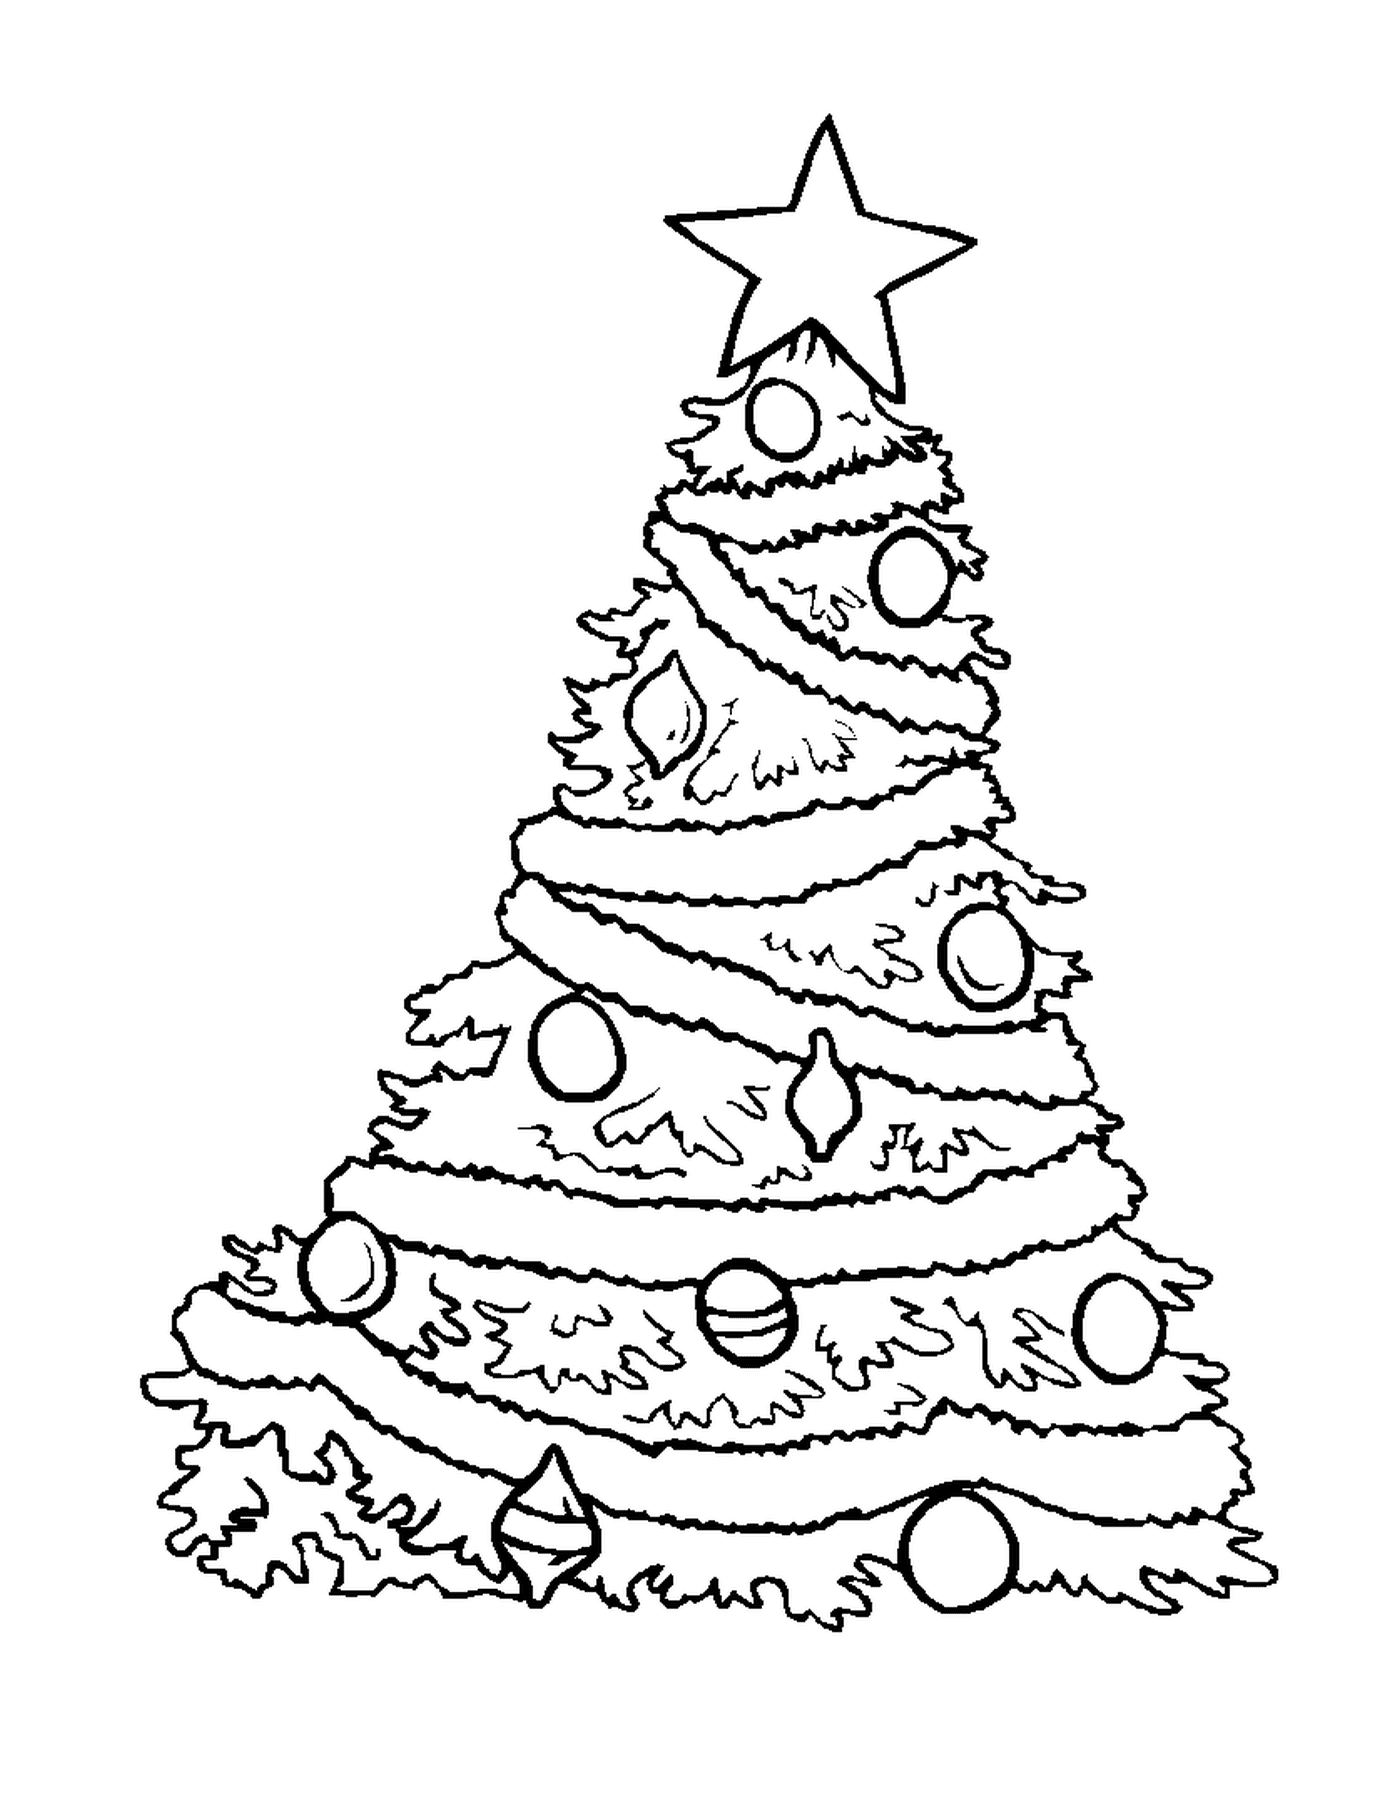  A Christmas tree decorated with ornaments 